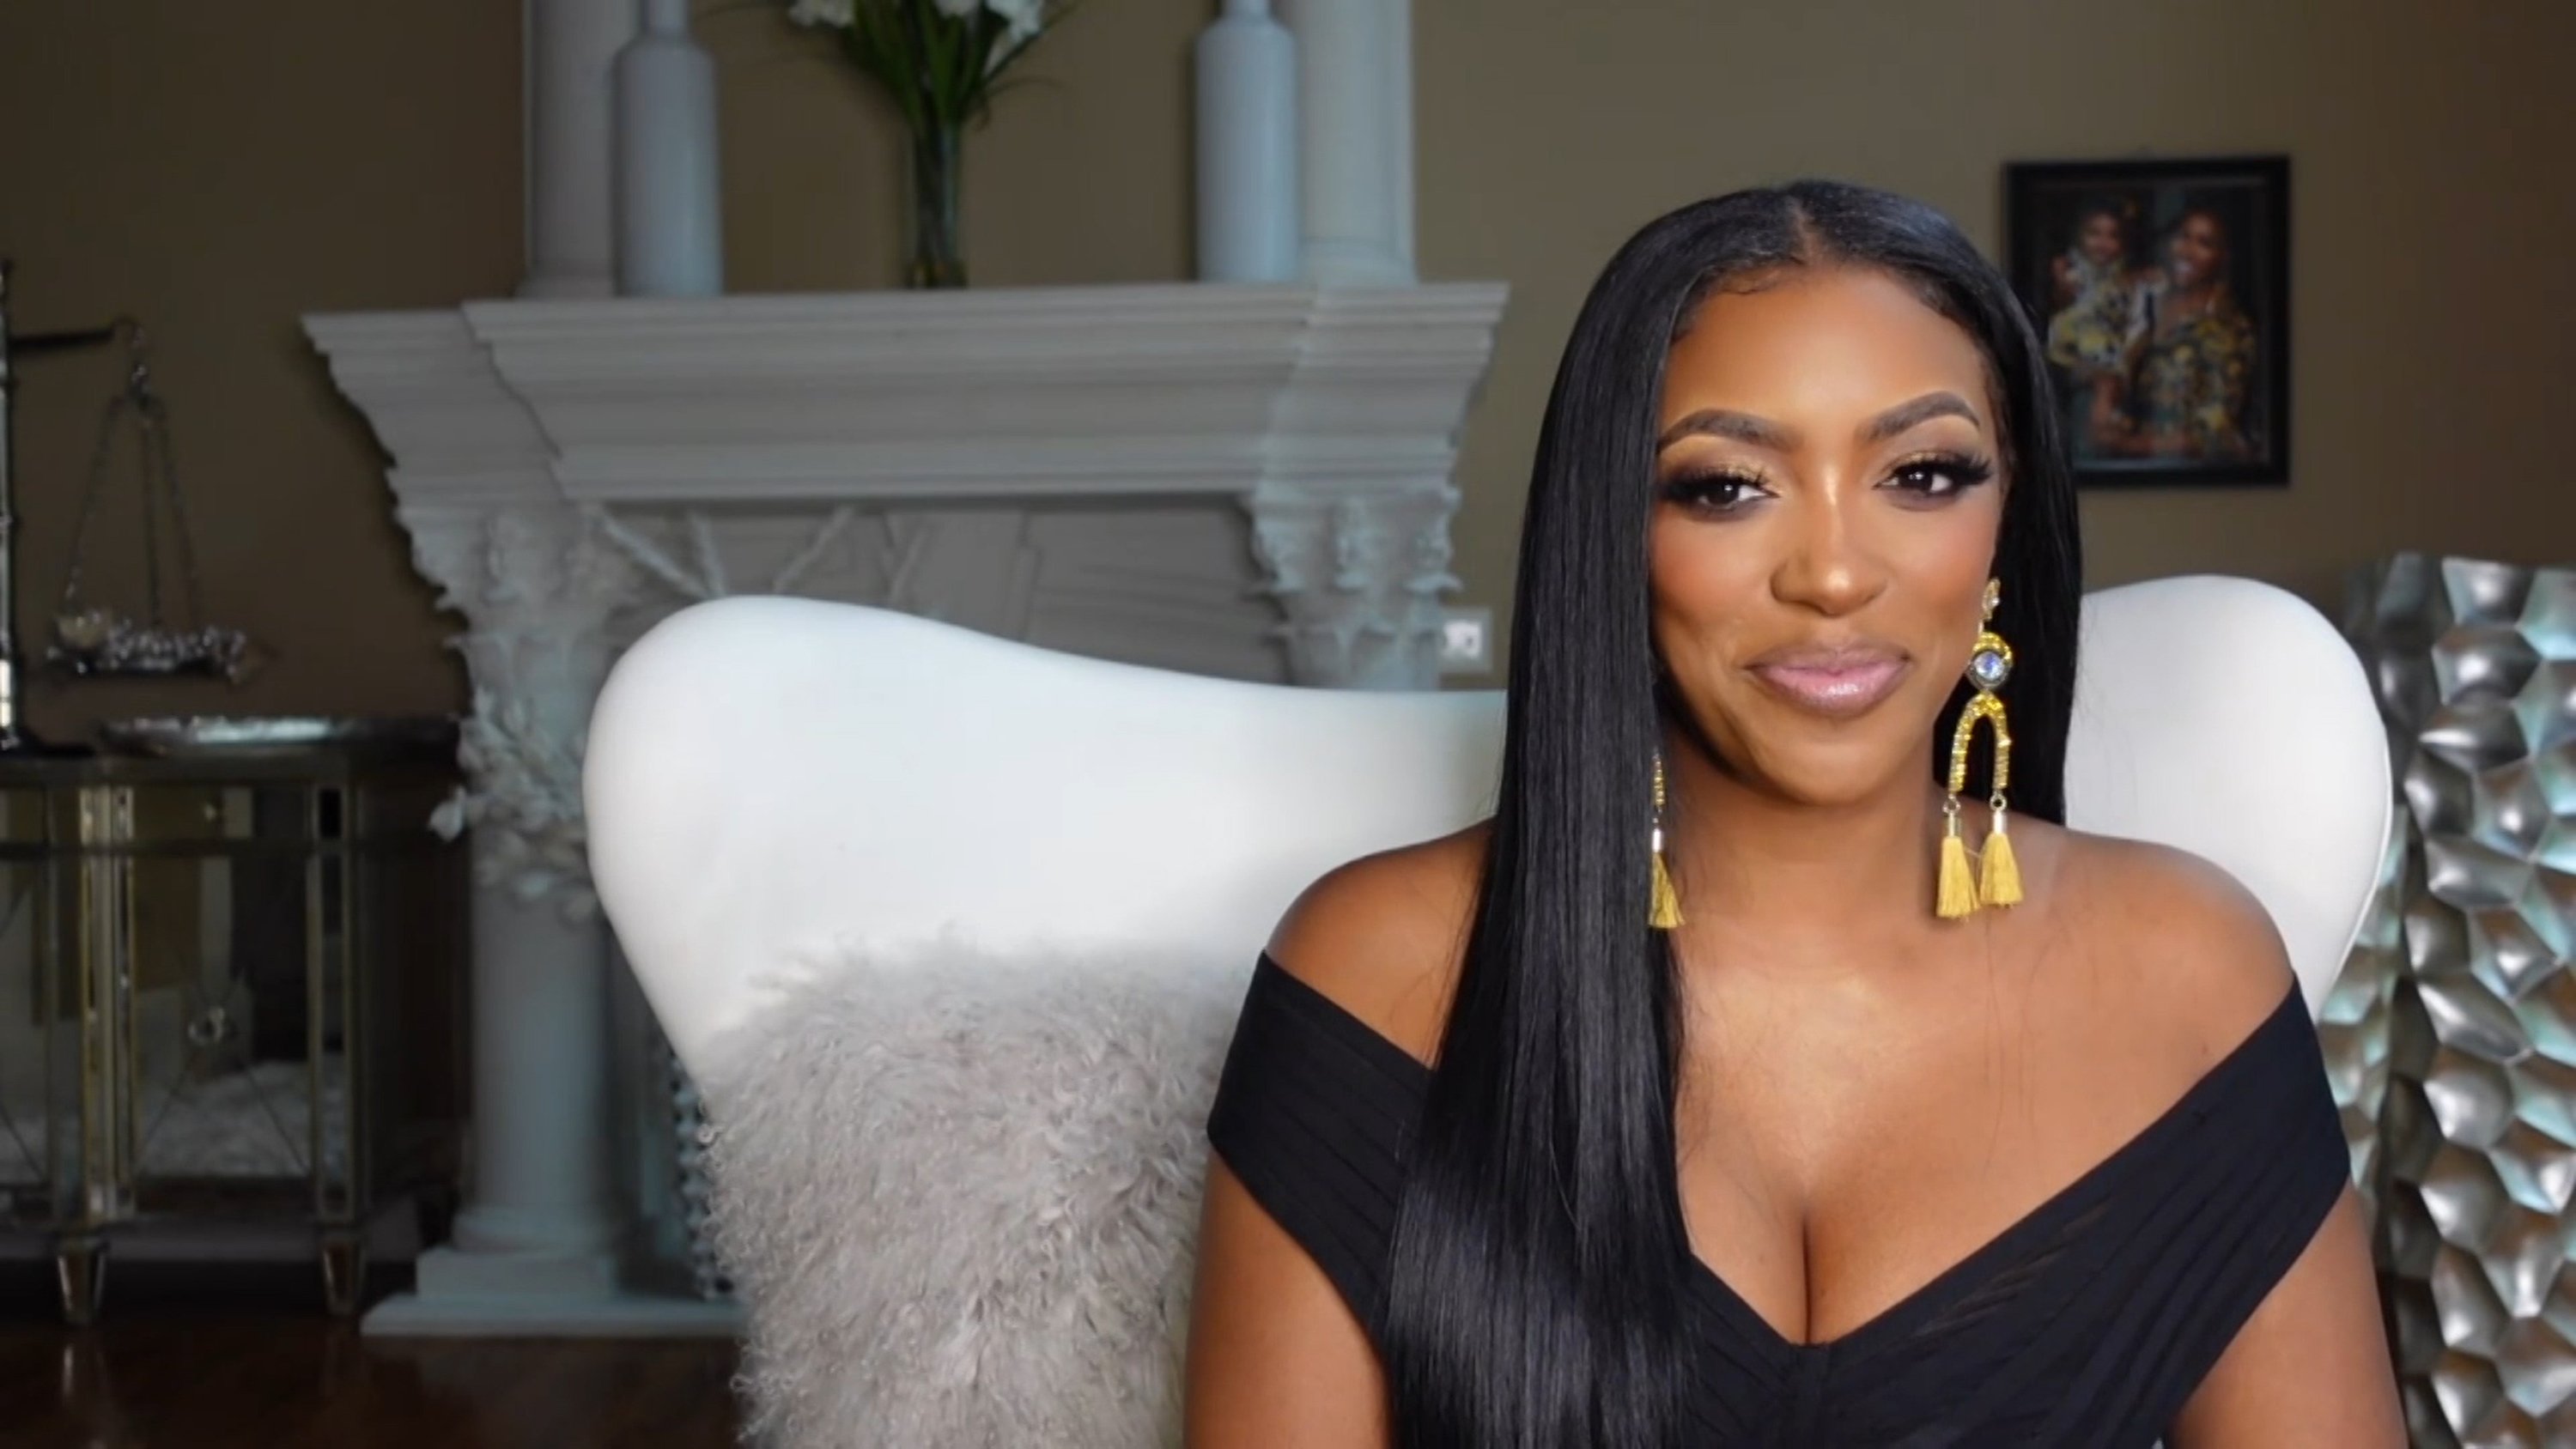 Porsha Williams of 'RHOA' smiling while wearing a black dress and yellow earrings on 'Watch What Happens Live with Andy Cohen'